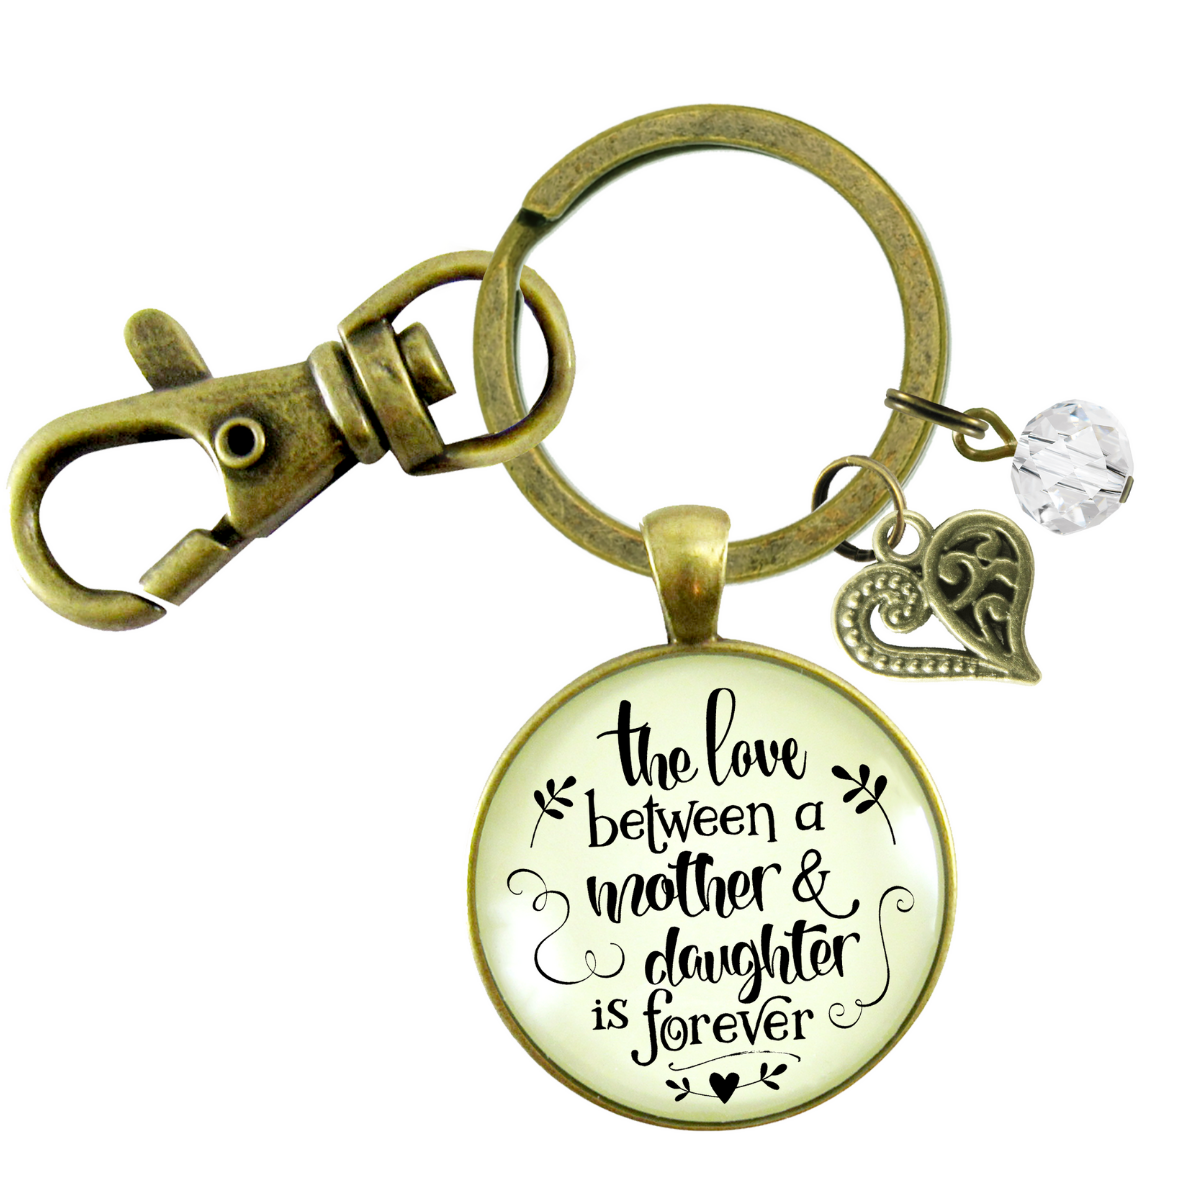 Love Between Mother Daughter Keychain Meaningful Womens Jewelry Gift - Gutsy Goodness Handmade Jewelry;Love Between Mother Daughter Keychain Meaningful Womens Jewelry Gift - Gutsy Goodness Handmade Jewelry Gifts